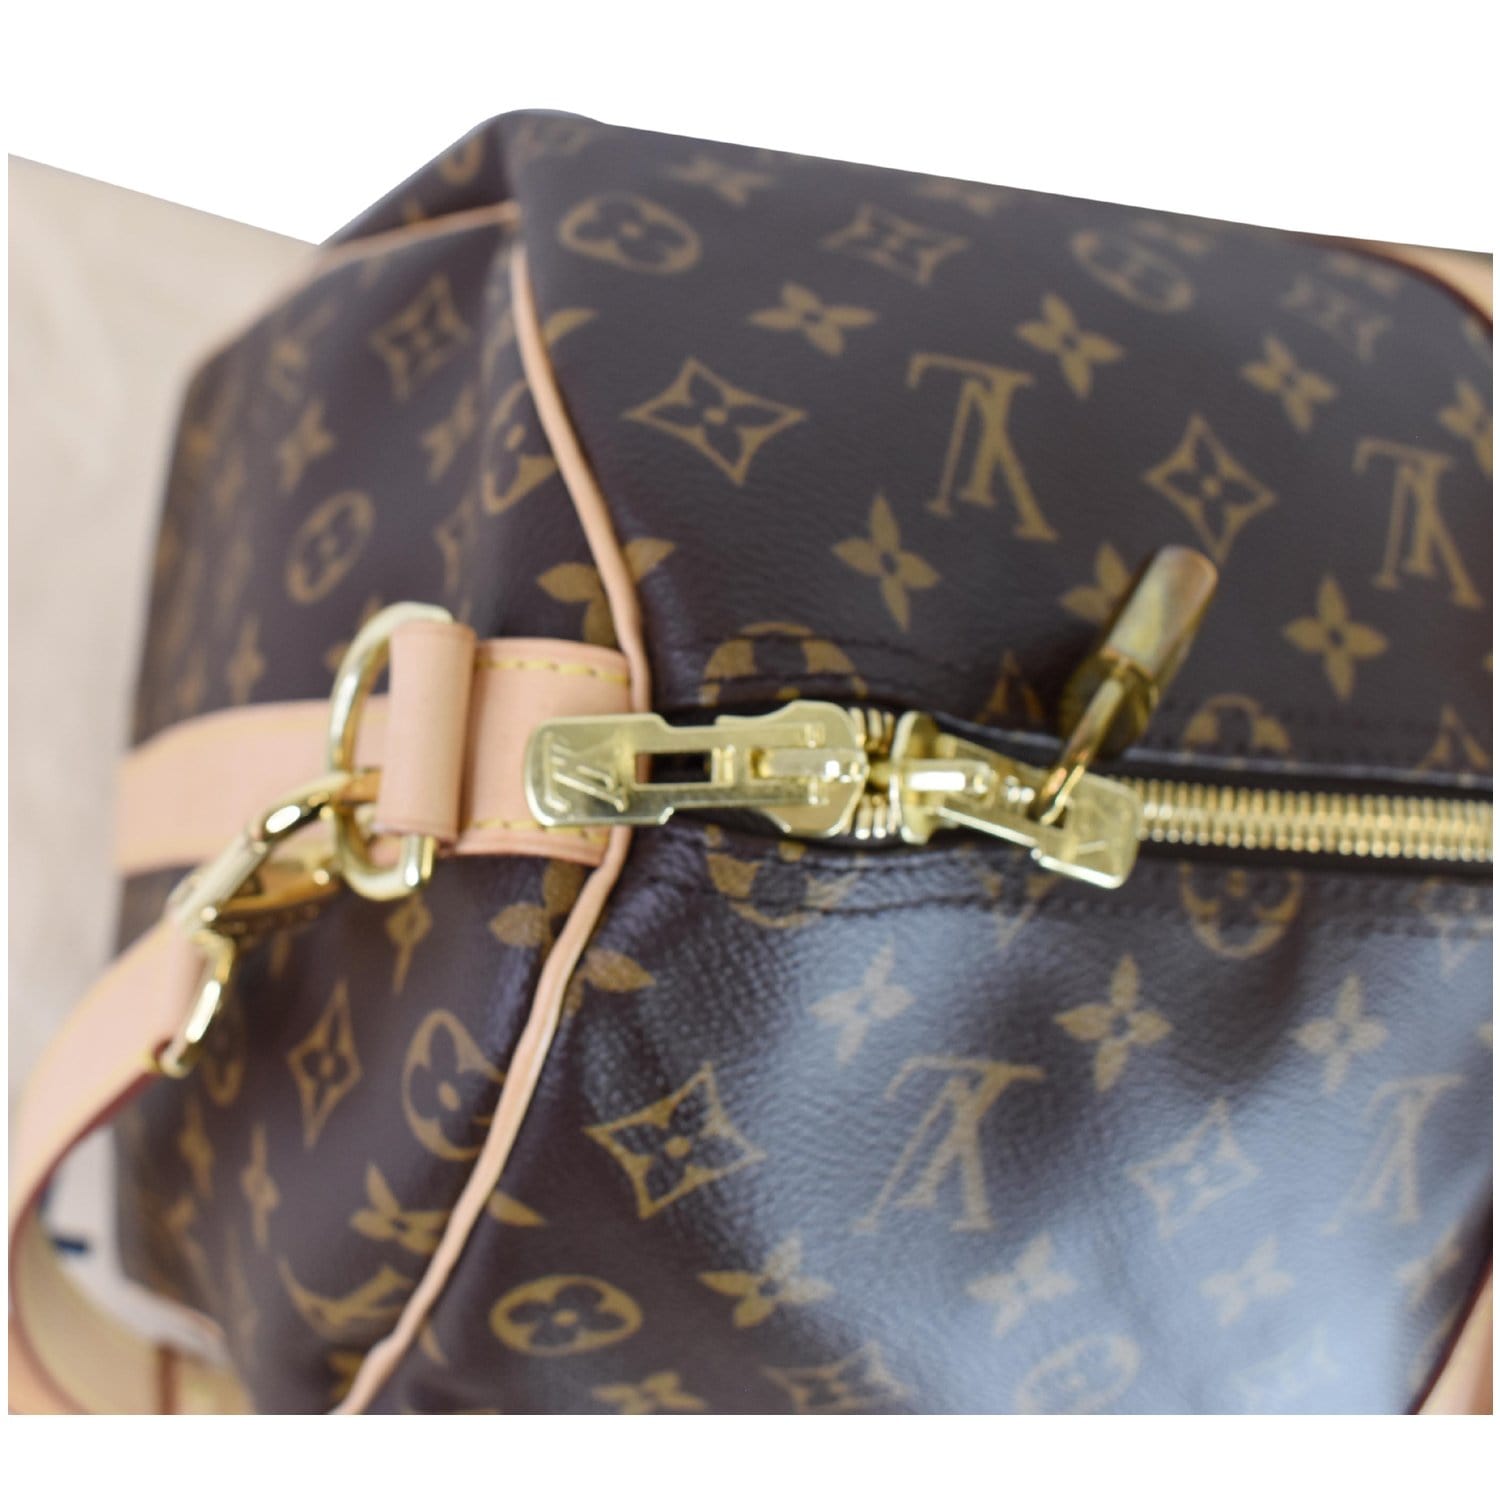 Louis Vuitton Keepall 50 Travel Bag in Brown Monogram Canvas and